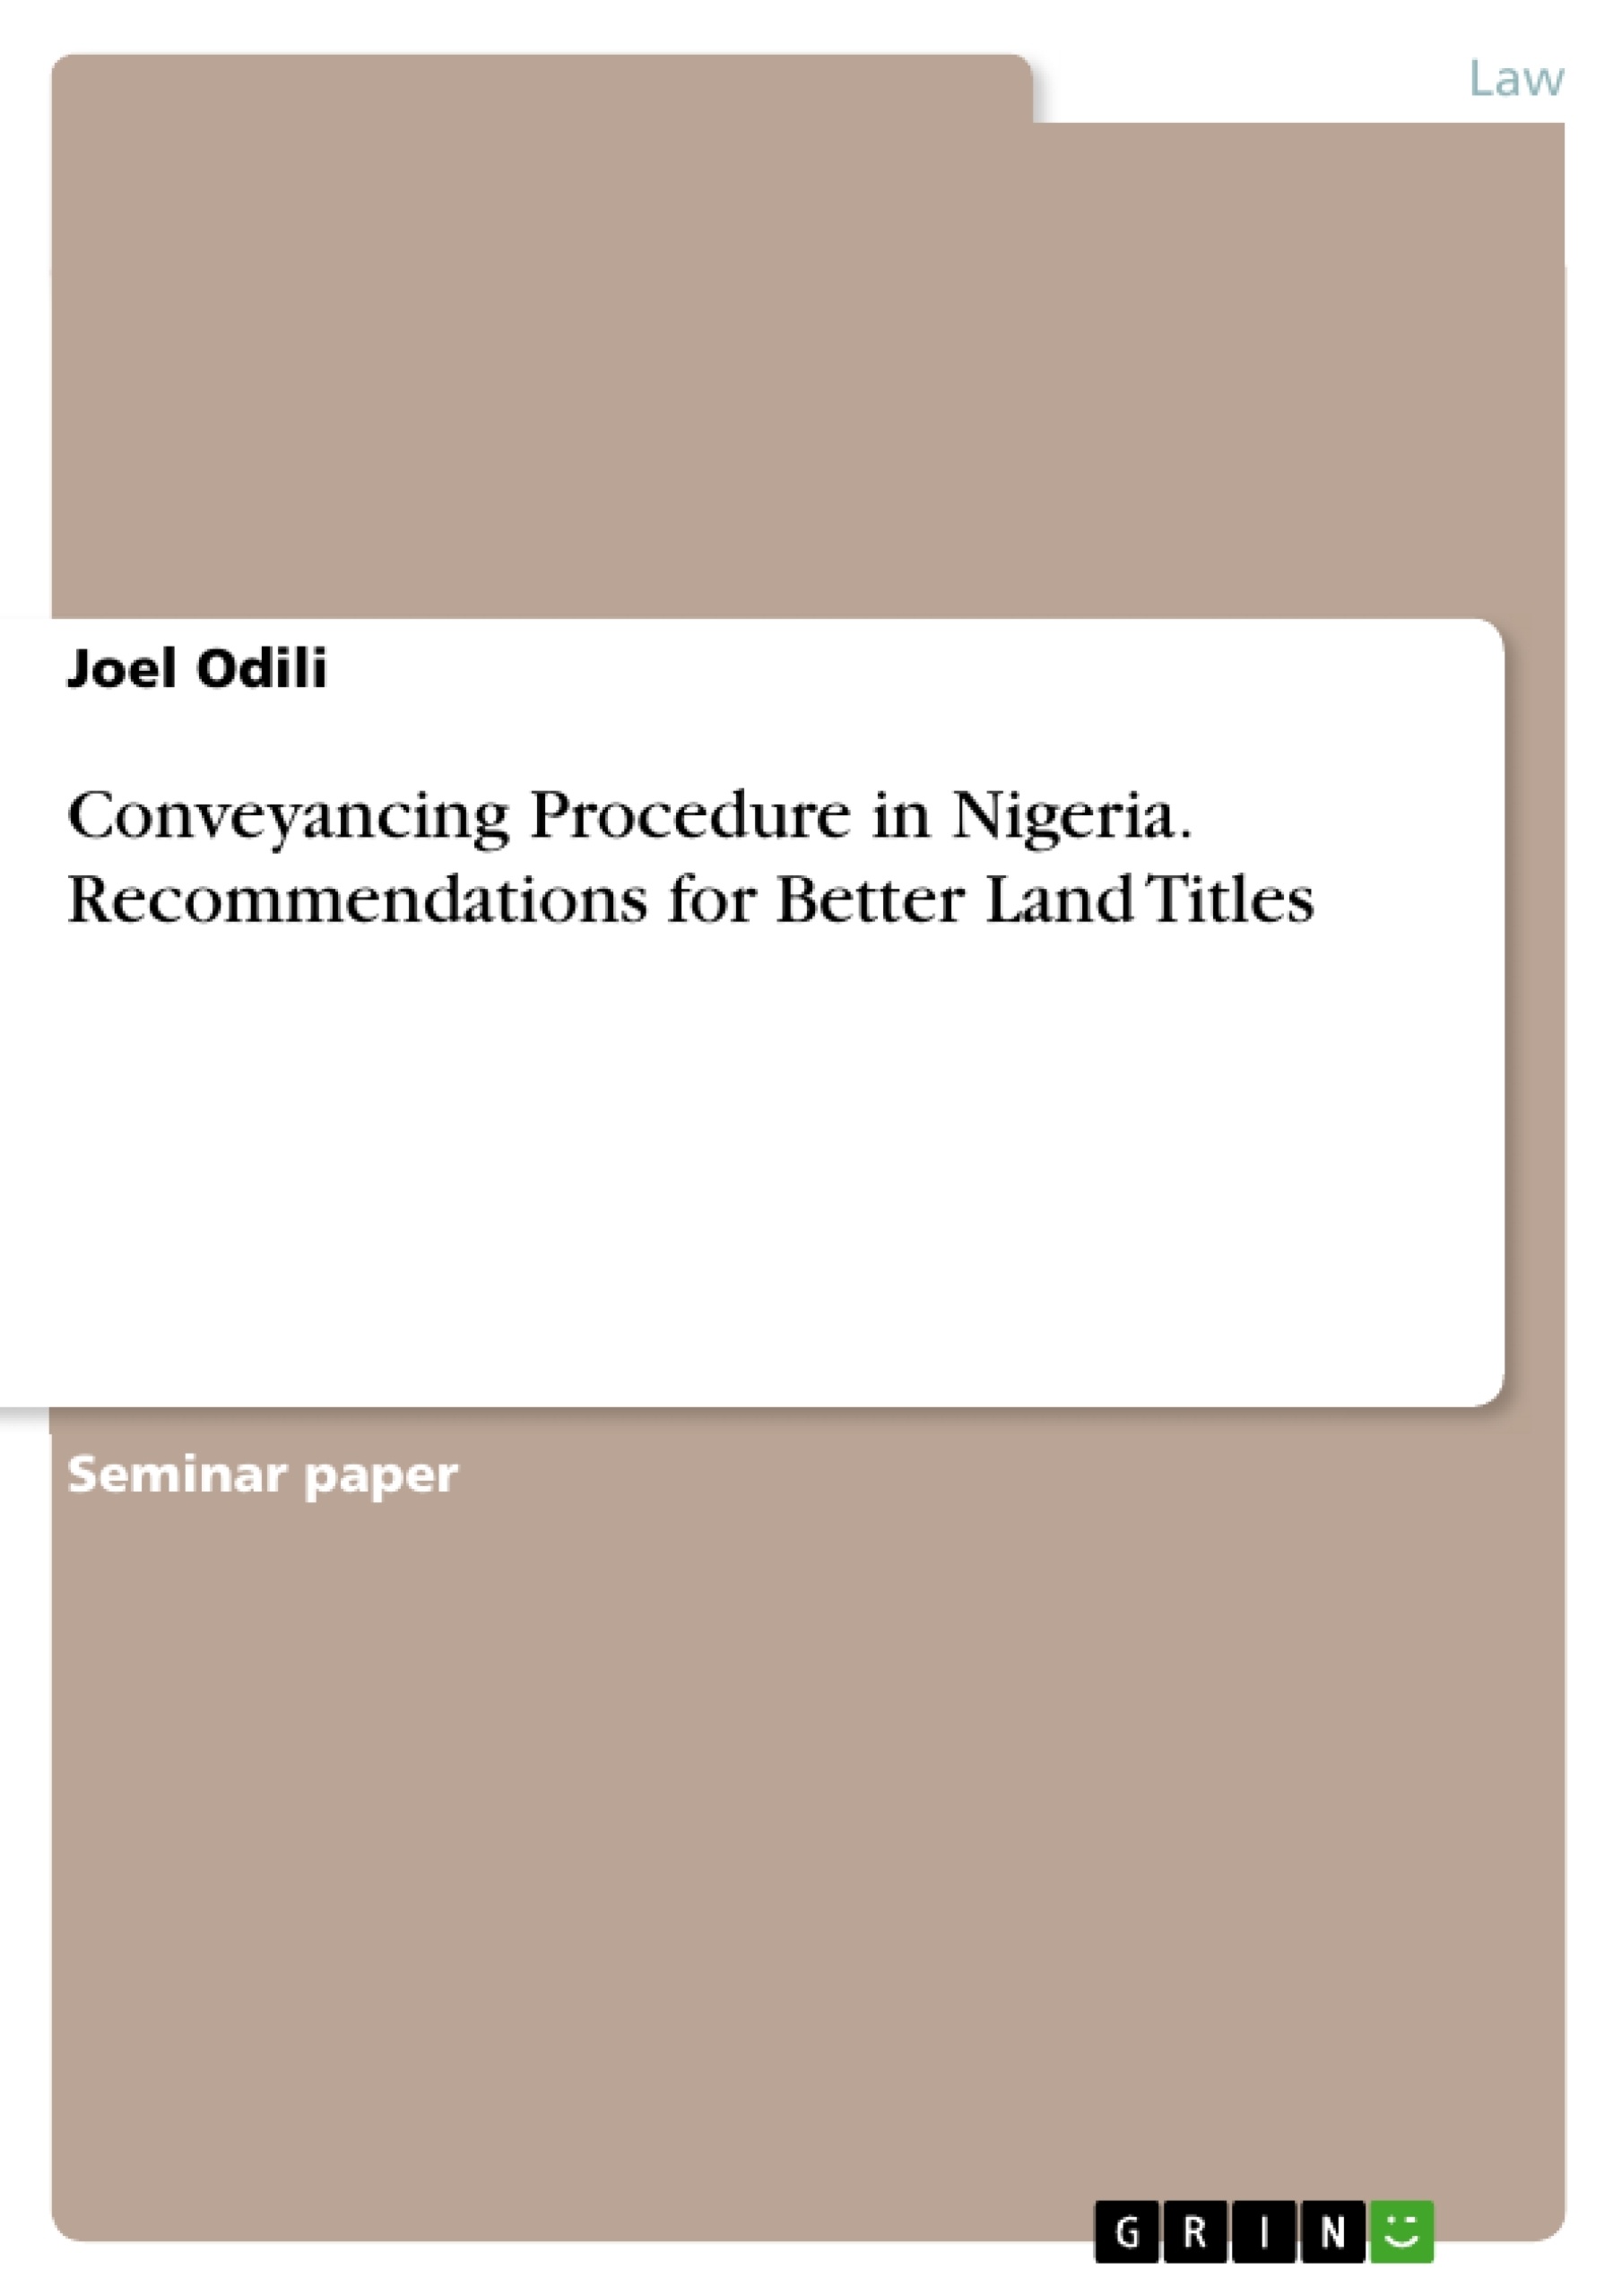 Title: Conveyancing Procedure in Nigeria. Recommendations for Better Land Titles